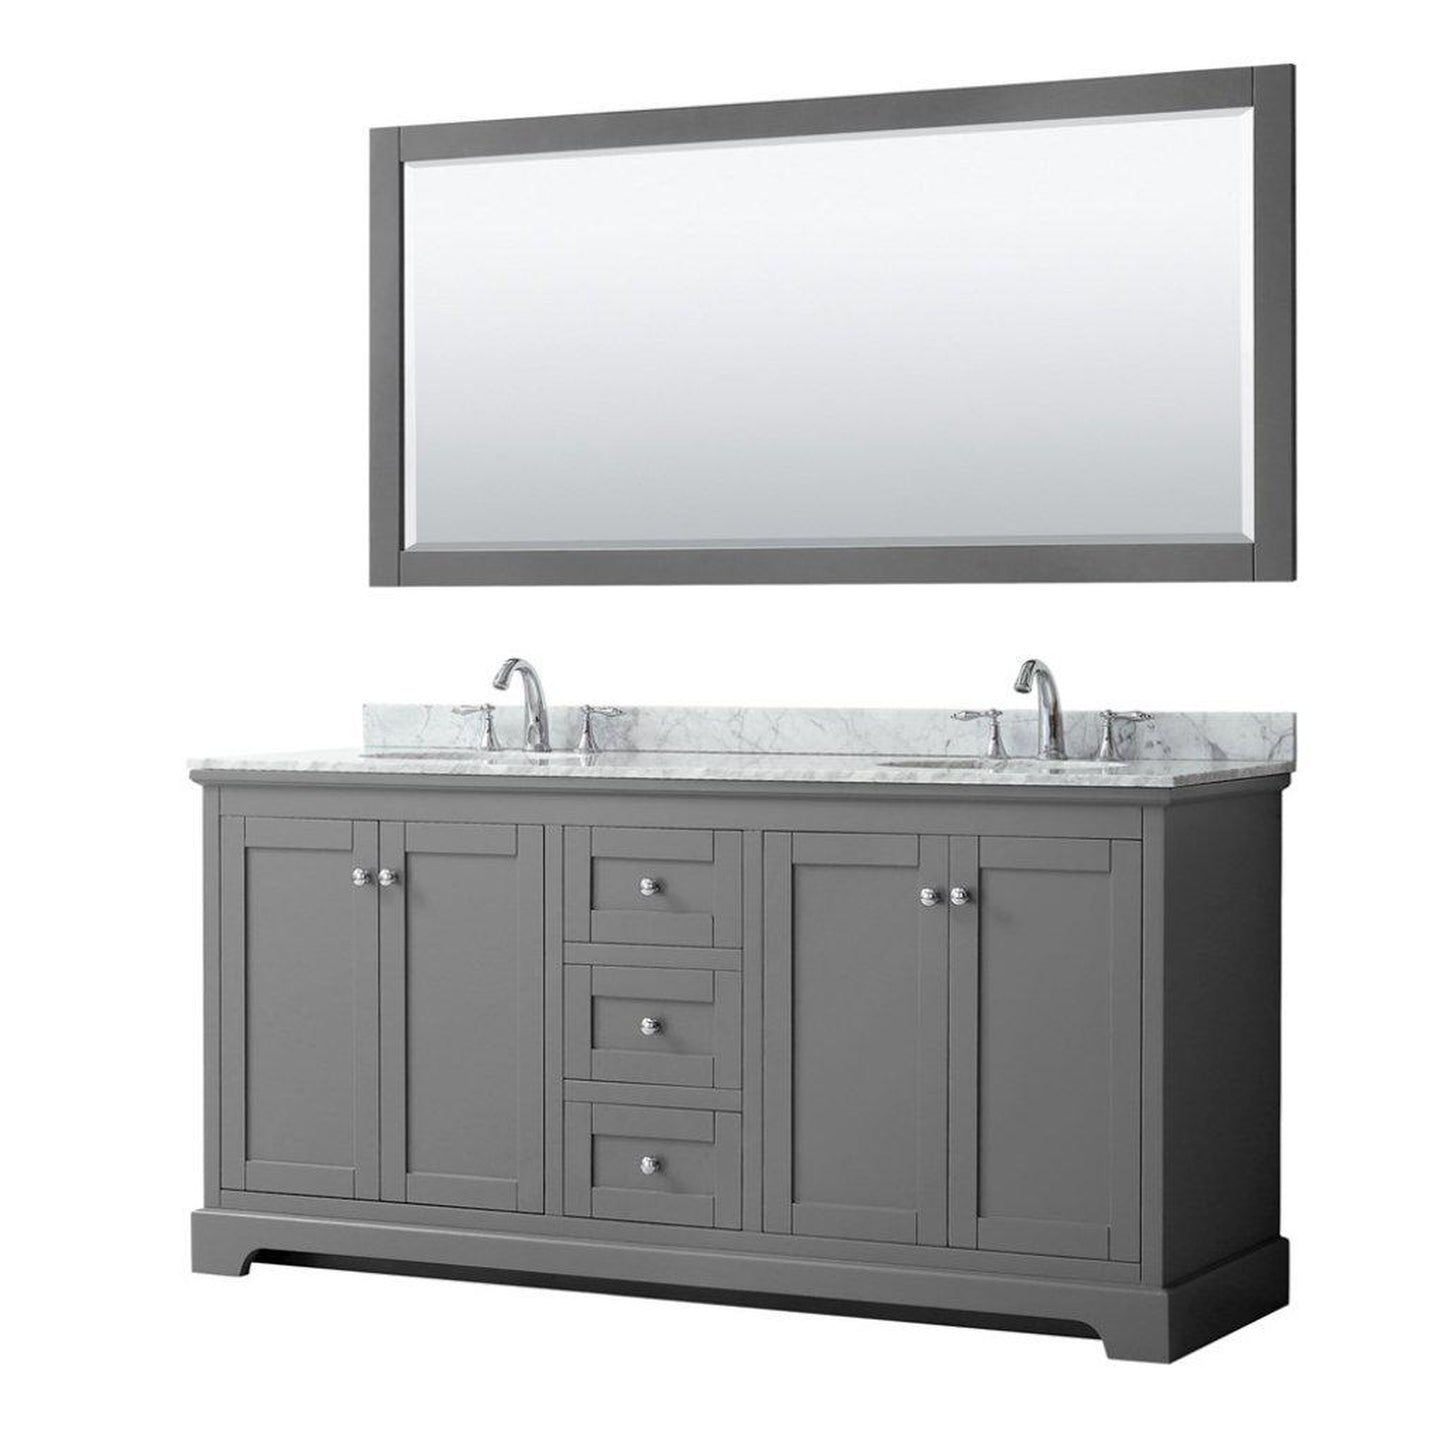 Wyndham Collection Avery 72" Dark Gray Double Bathroom Vanity Set With White Carrara Marble Countertop With 3-Hole Faucet And 8" Oval Sink And 70" Mirror